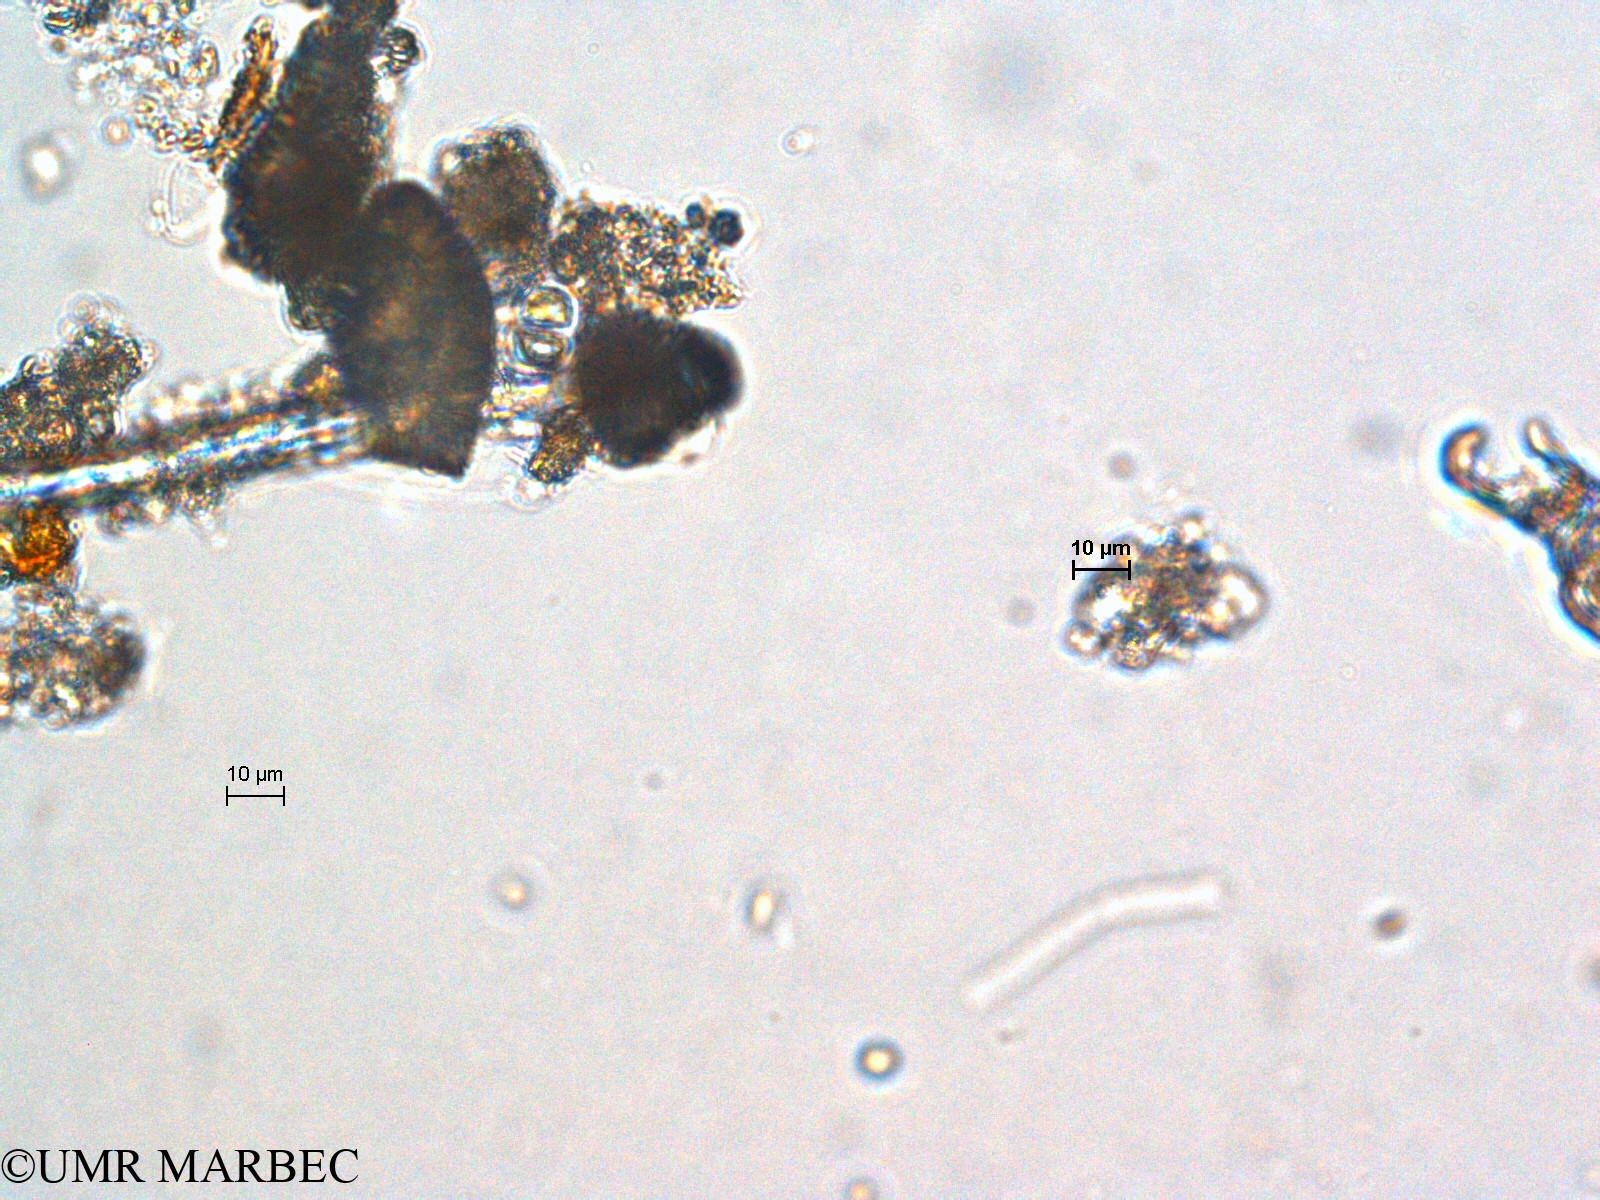 phyto/Scattered_Islands/europa/COMMA April 2011/Chroococcus sp10(copy).jpg